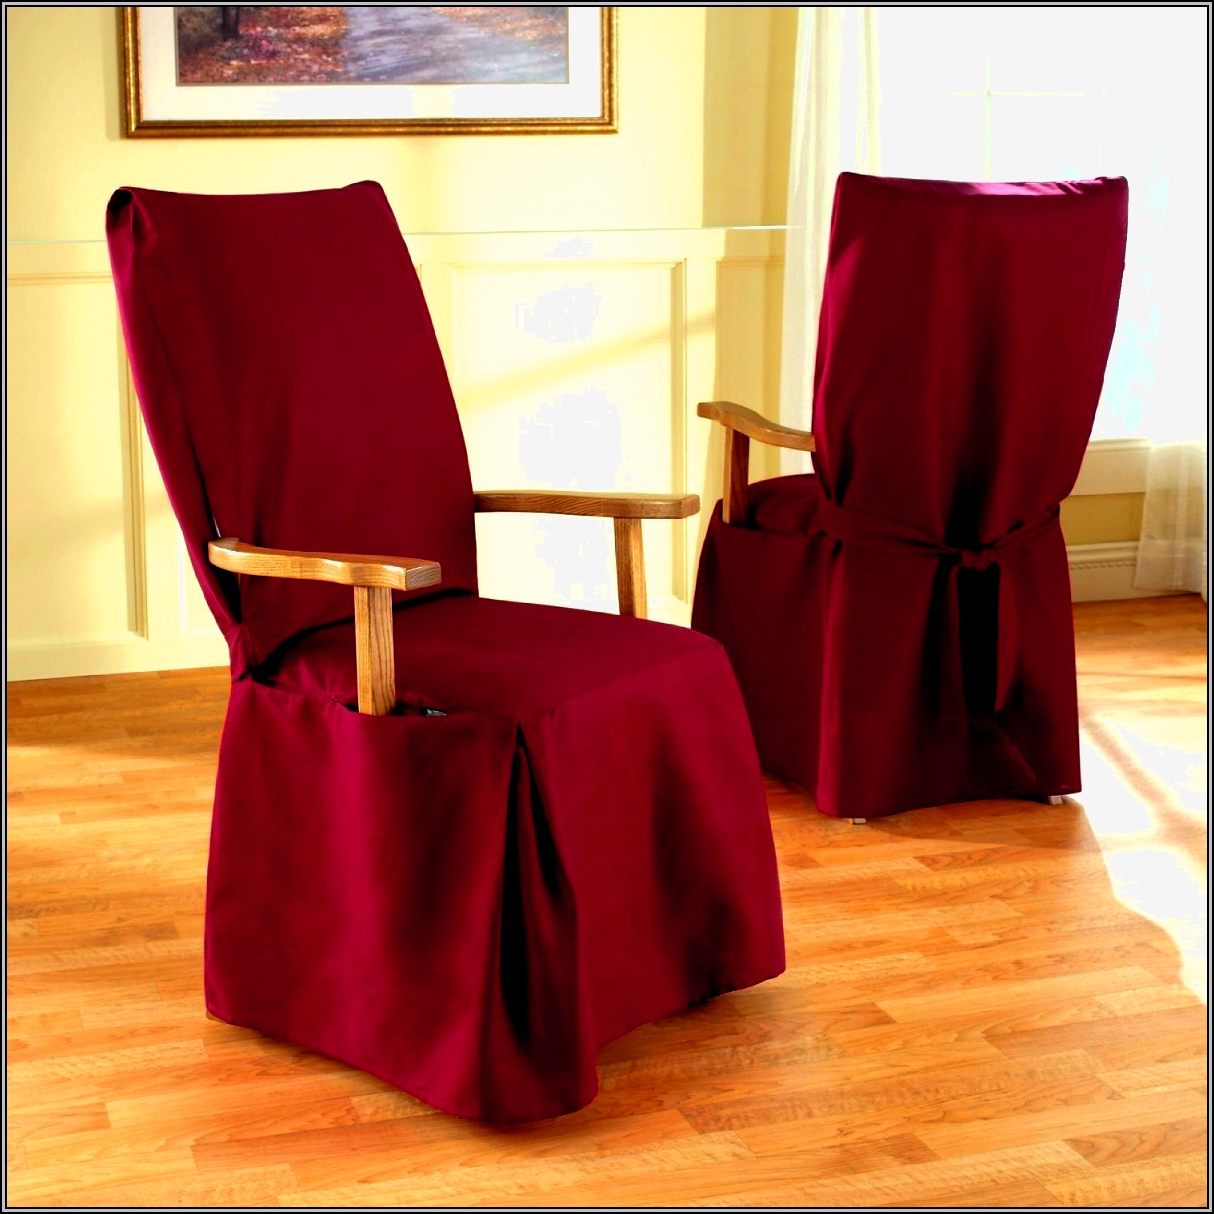 Diy Dining Room Chair Covers